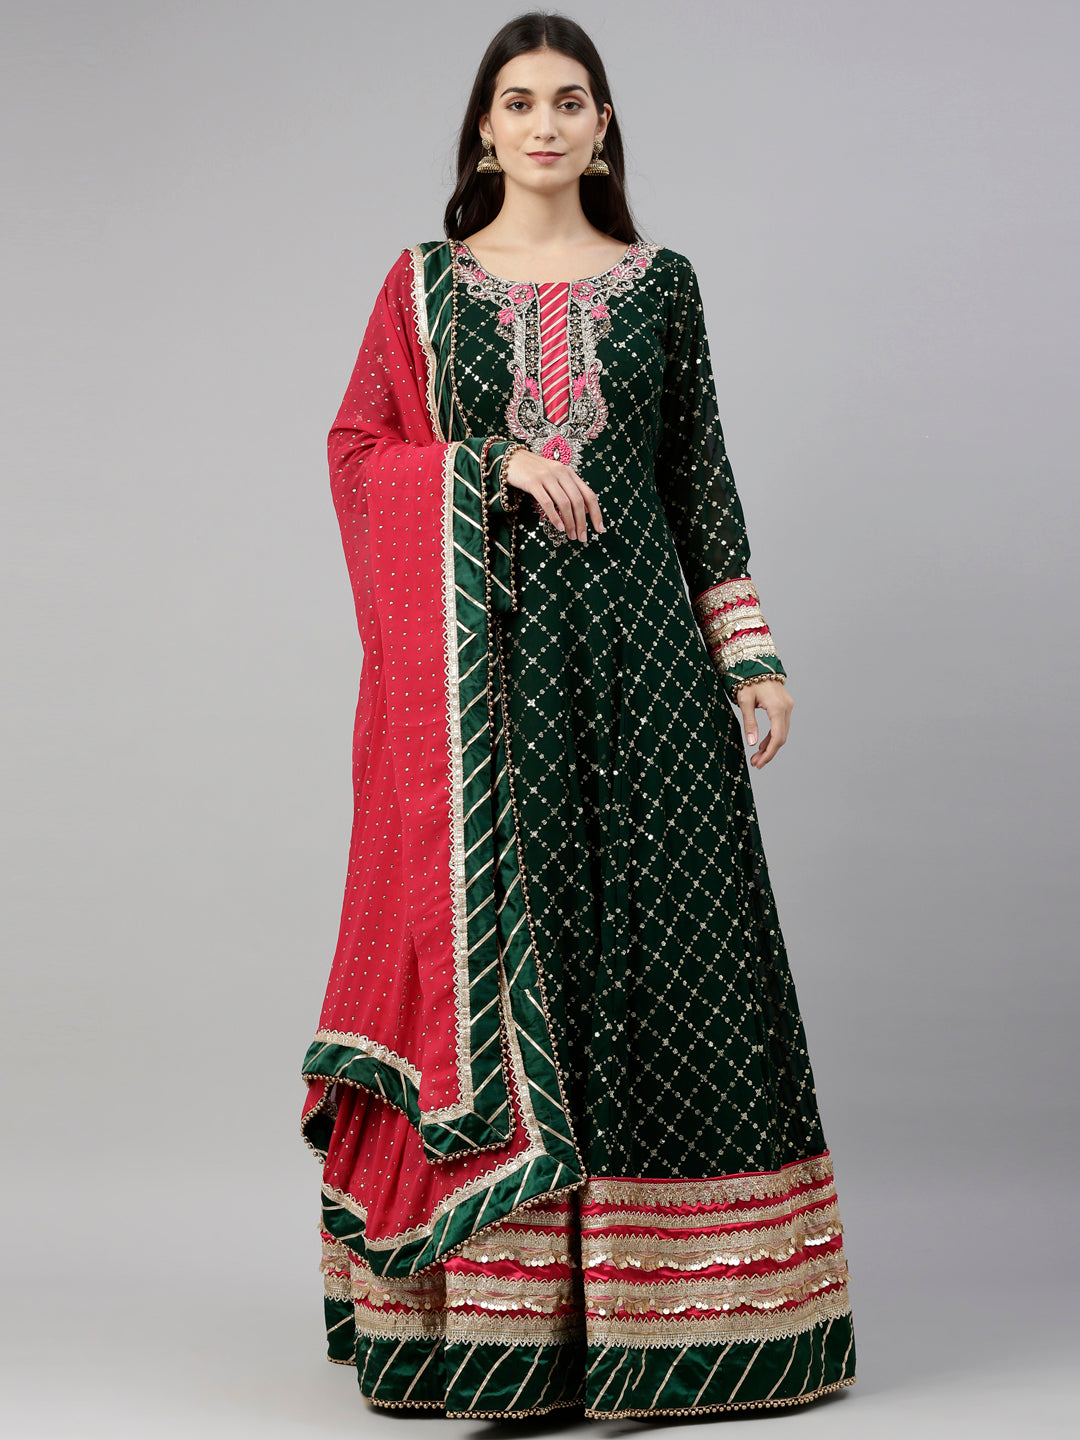 Neeru'S Bottle Green Color, Georgette Fabric Gown